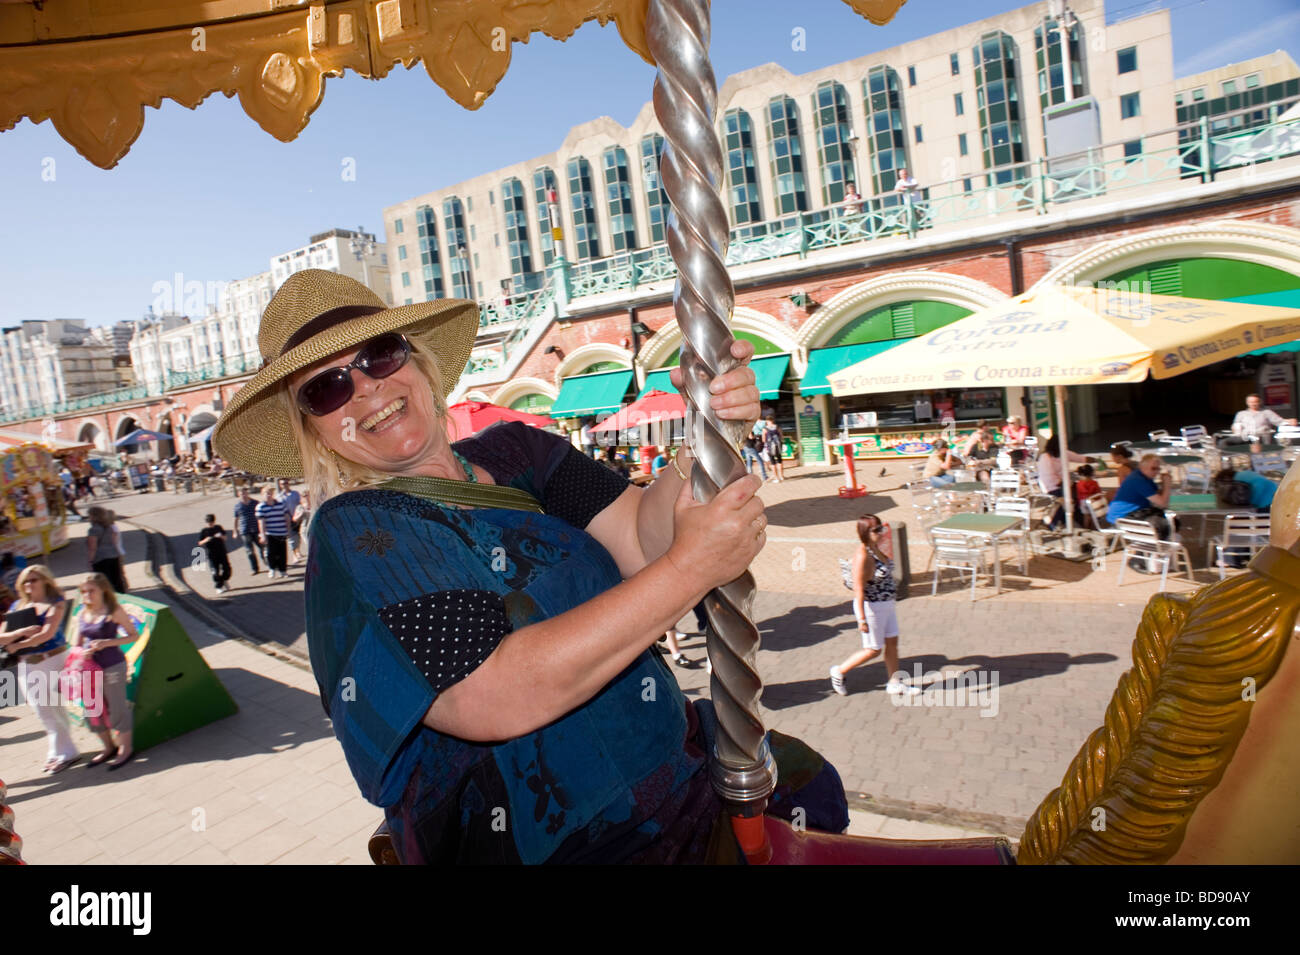 Brighton Merry go round Britain England Holiday Staycation happy enjoy Summer Sunshine Hot beach Blue sky August woman laugh me Stock Photo